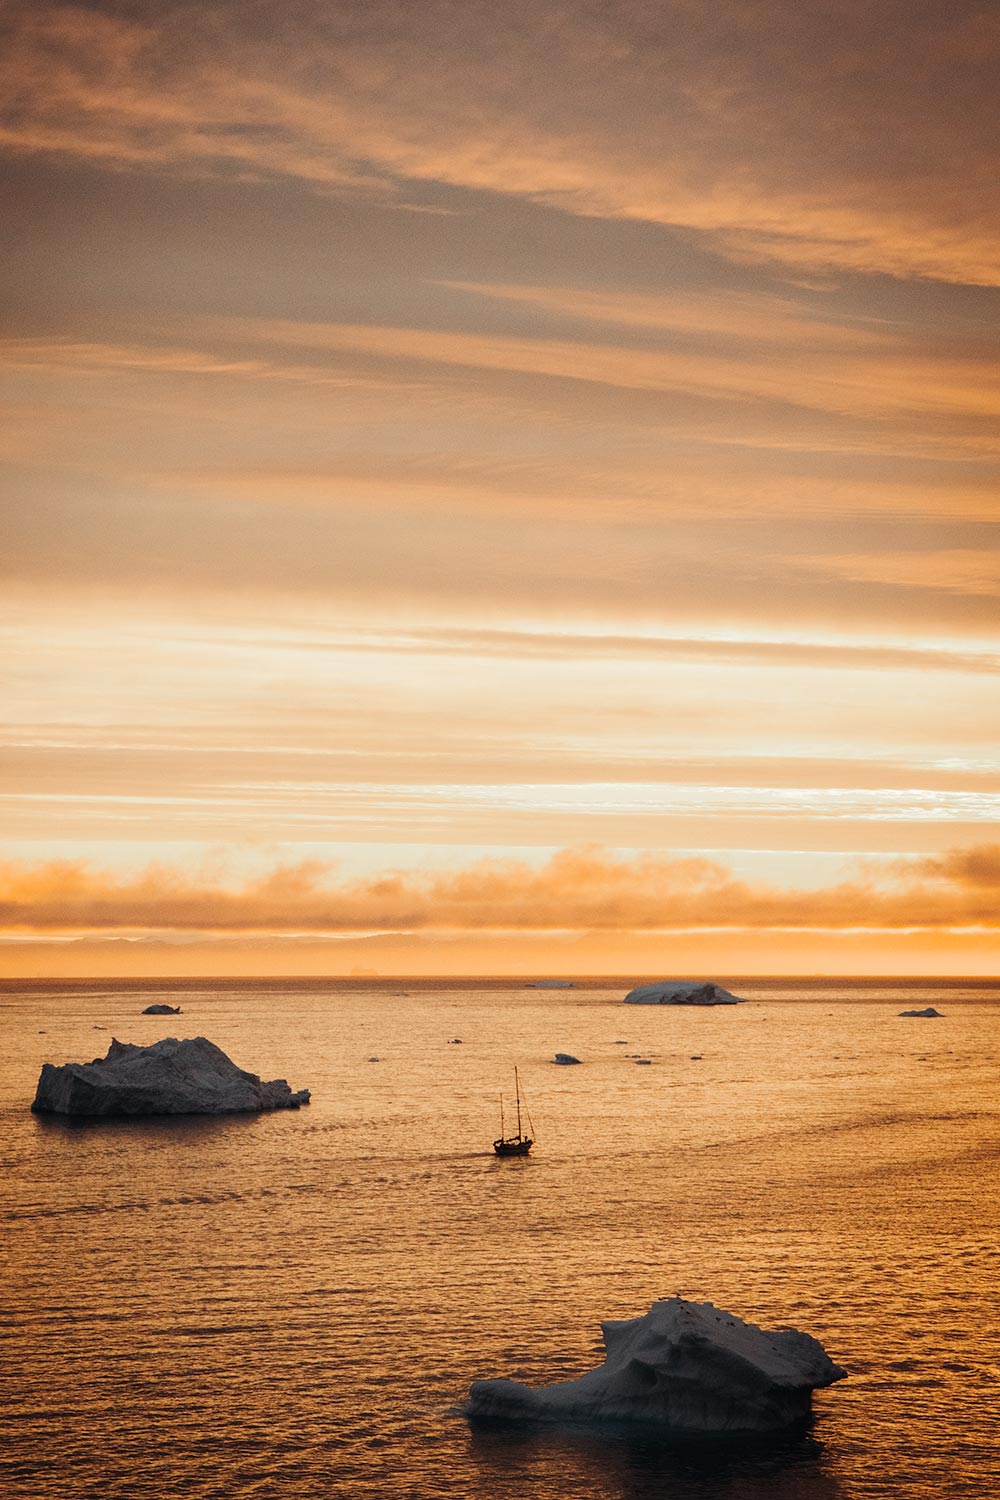 Sunset reflections on the icy waters during a Greenland iceberg tour